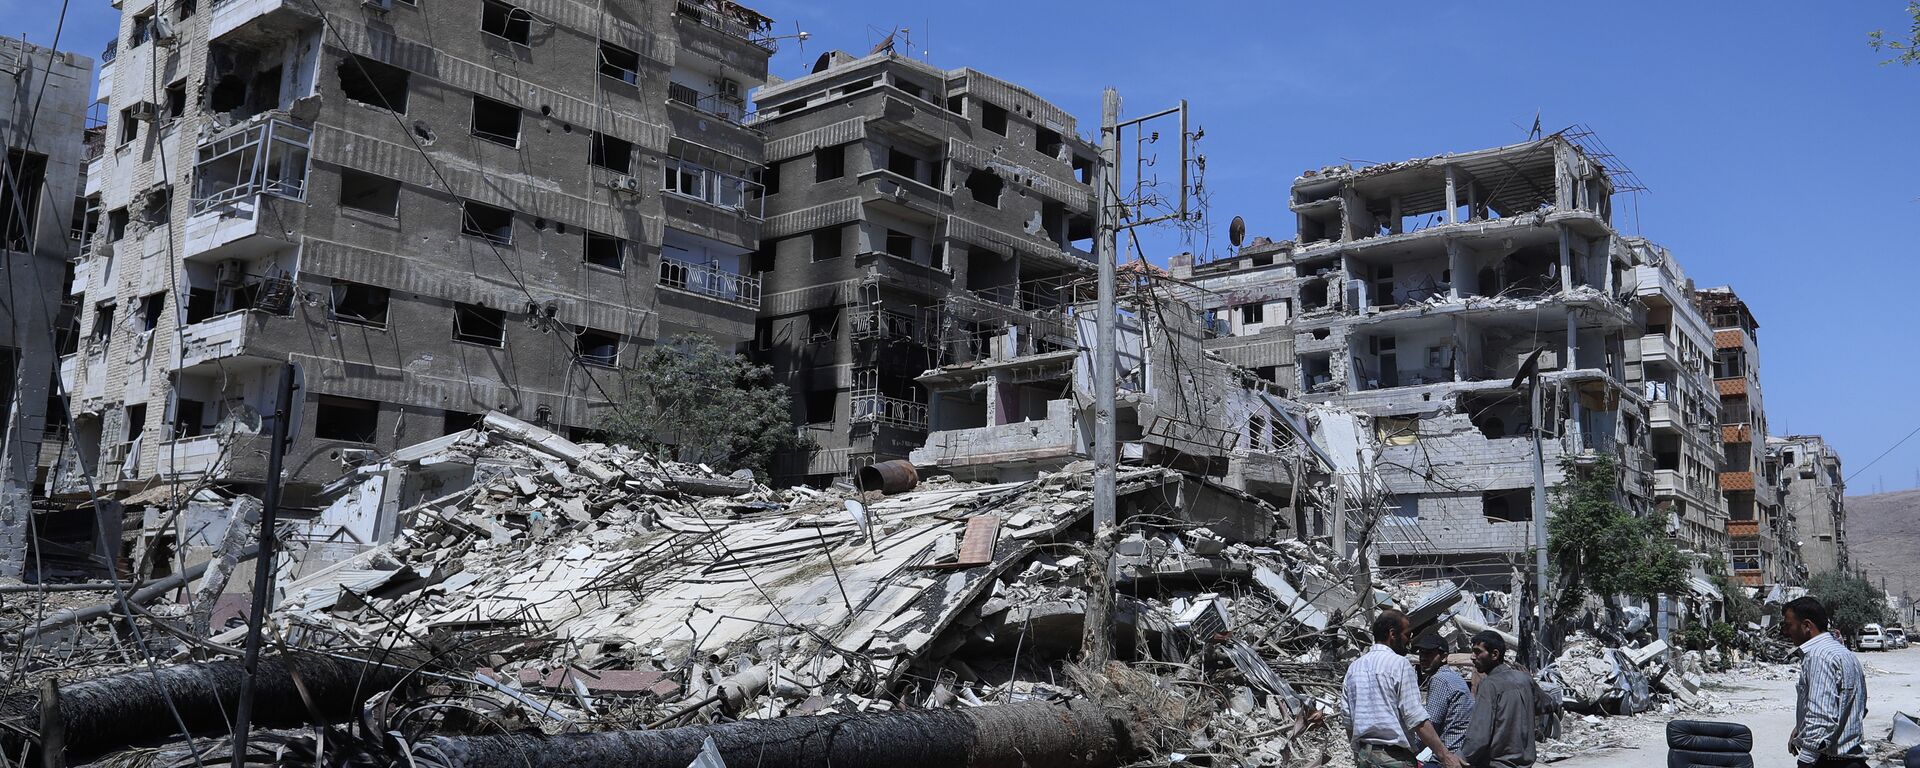 Syrians stand in front of damaged buildings in the Damascus suburb of Douma, the site of an alleged chemical weapons attack, 16 April 2018 - Sputnik International, 1920, 21.01.2020